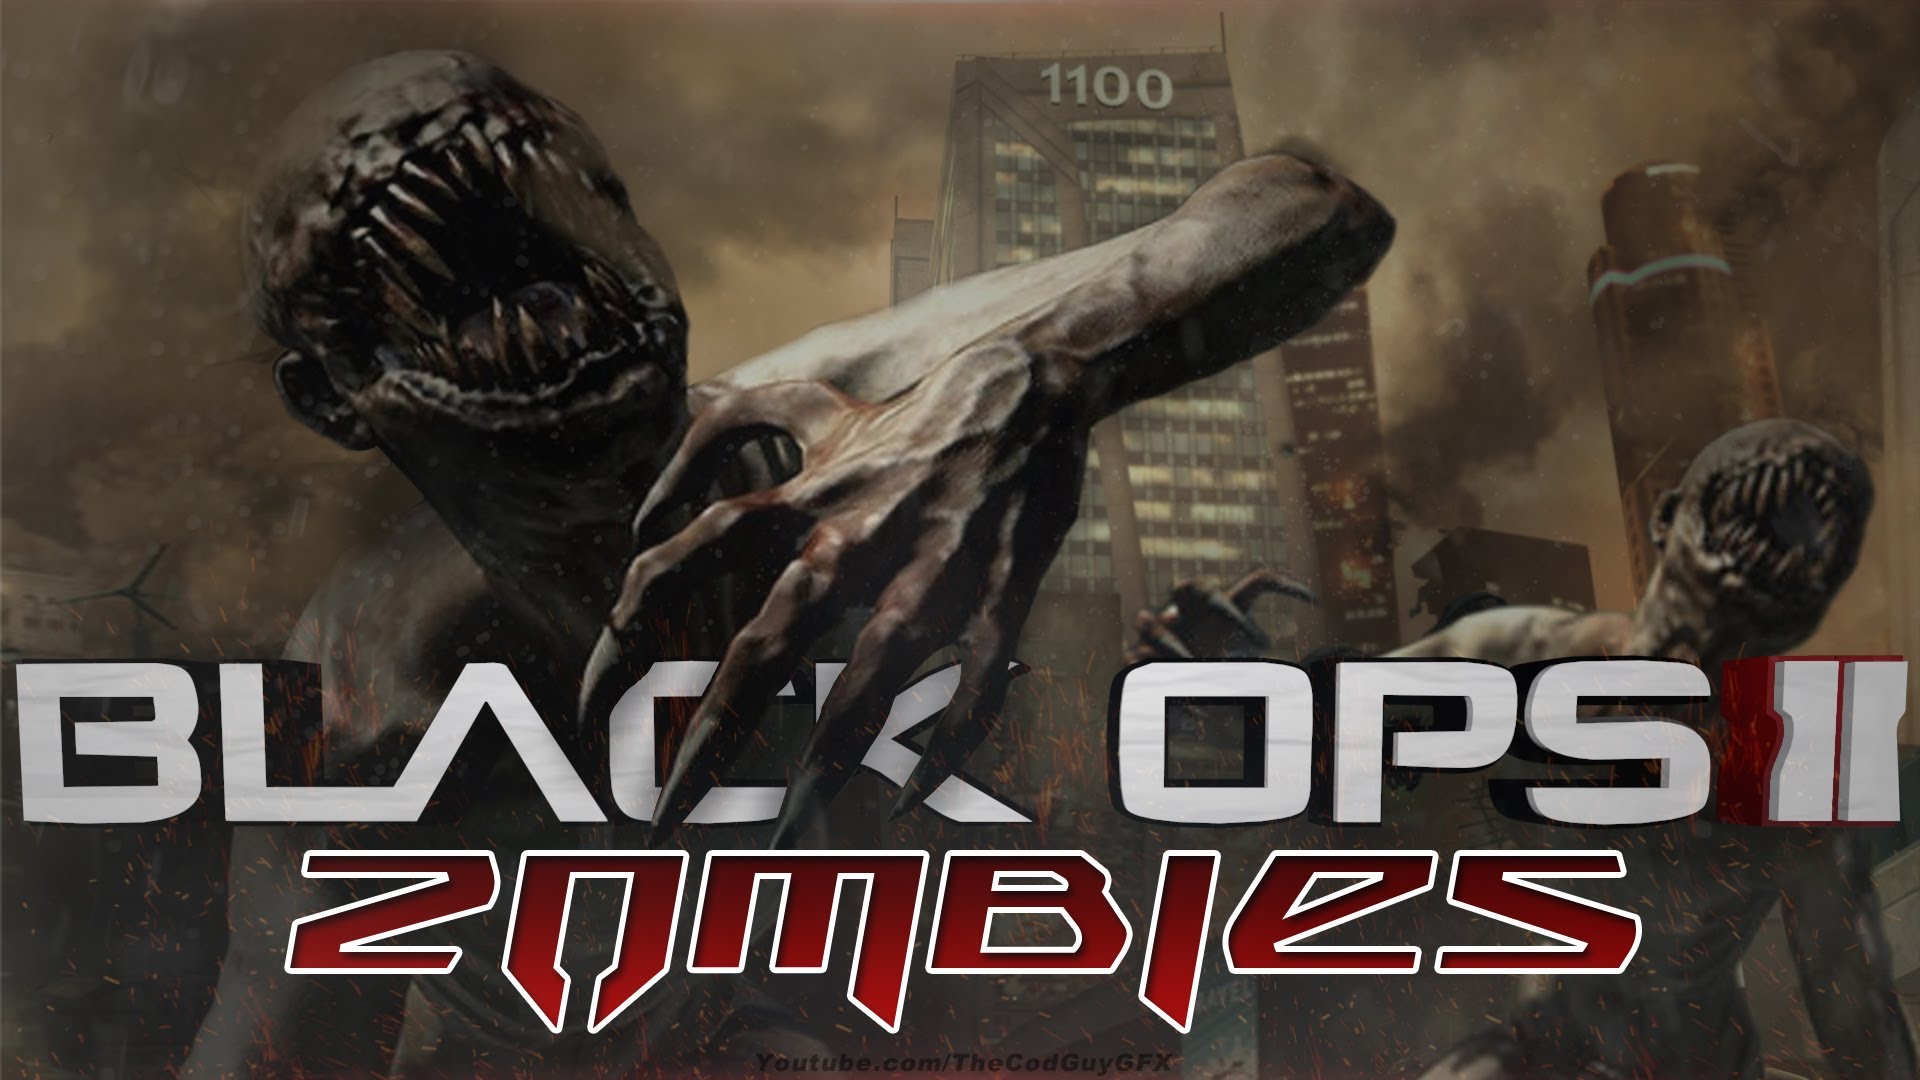 Call Of Duty Live Wallpapers - Zombie Call Of Duty Black Ops 1 - 1920x1080  Wallpaper 